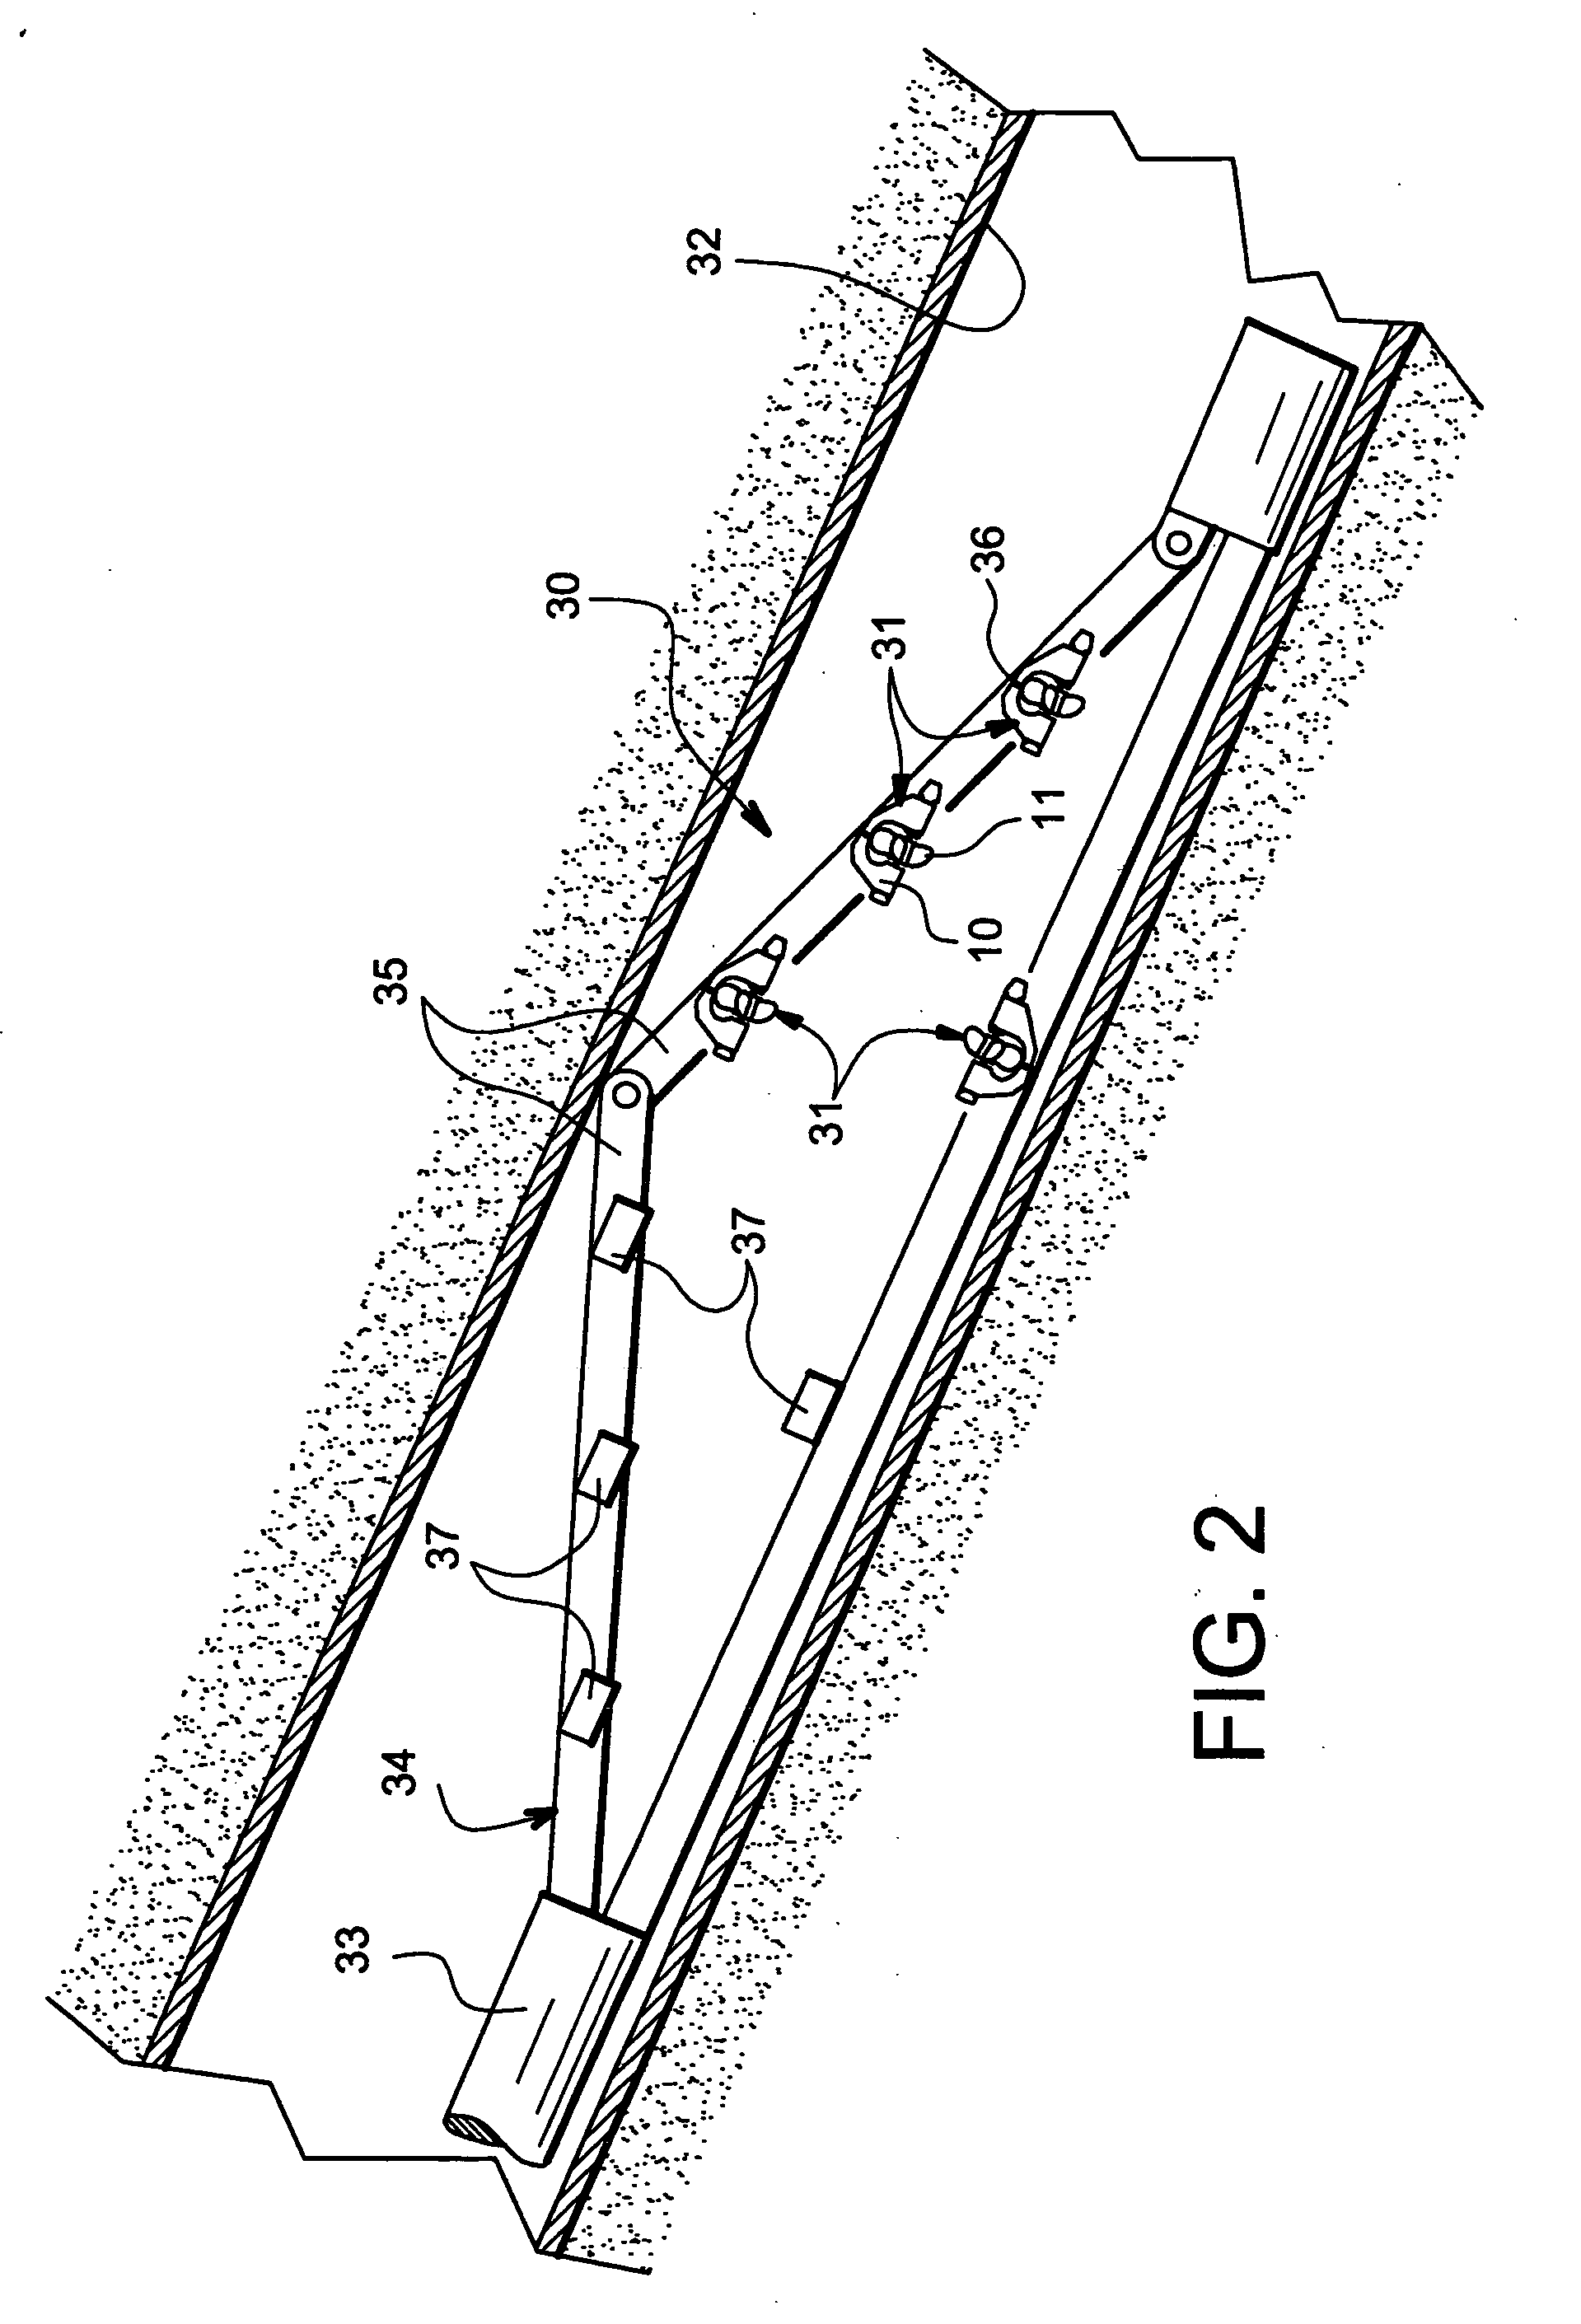 Impeller for data acquisition in a flow